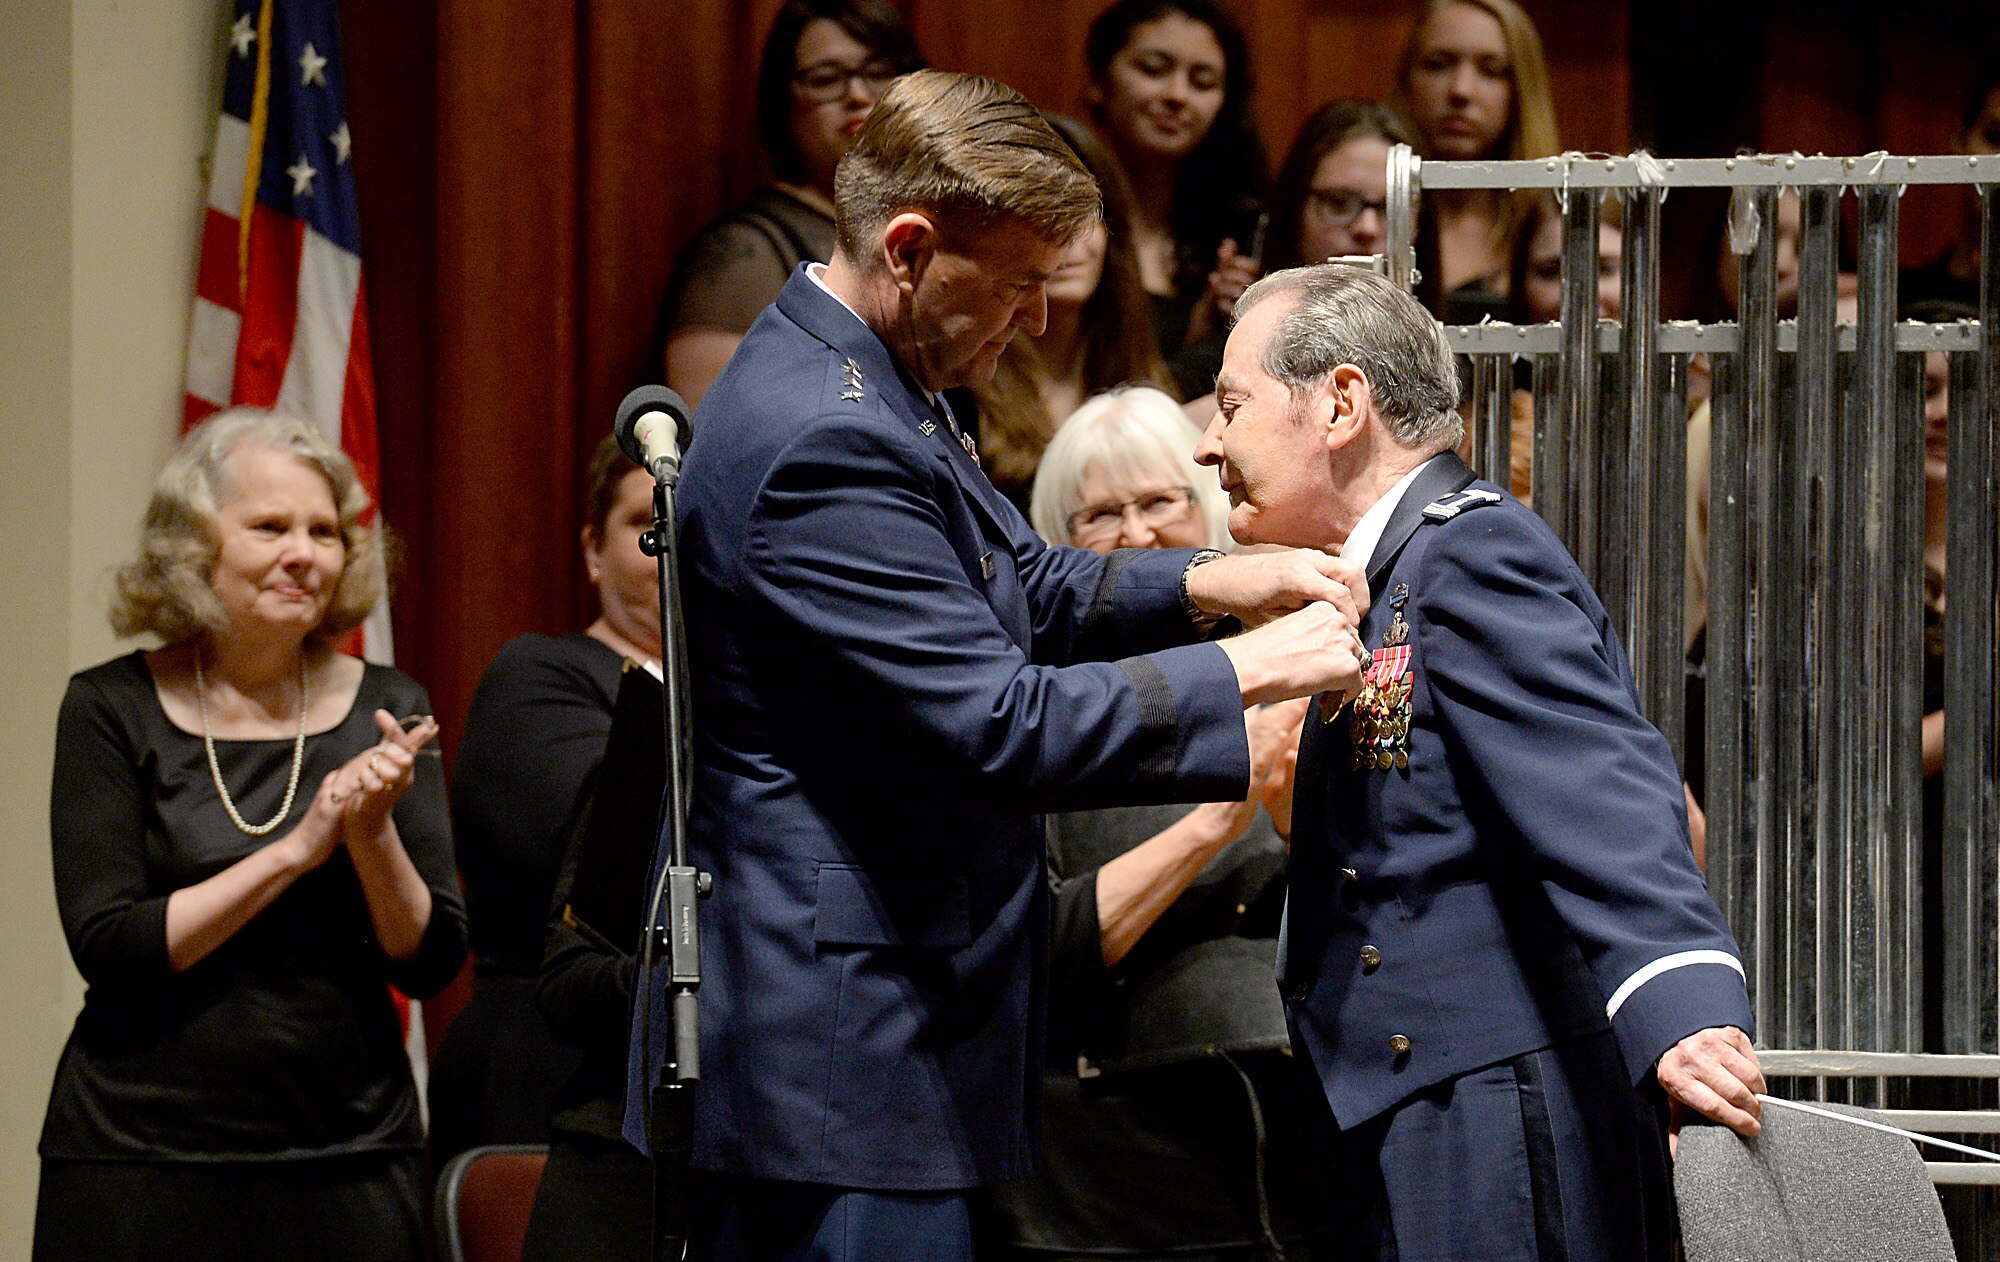 Air Force Assistant Vice Chief of Staff Gen. Stephen Hoog pins the Exceptional Service Medal on the coat of retired Col. Arnald Gabriel, after he conducted a special Memorial Day concert performance by the by Air Force Symphony at the John F. Kennedy Center for the Performing Arts May 24, 2015, in Washington, D.C. Gabriel served in the Army as a combat machine gunner and landed in Normandy, France, on D-Day with the 29th Infantry Division.  He later became an Air Force officer and served with the U.S. Air Force Band.  Gabriel retired as the band's commander in 1985. (U.S. Air Force photo/Scott M. Ash)